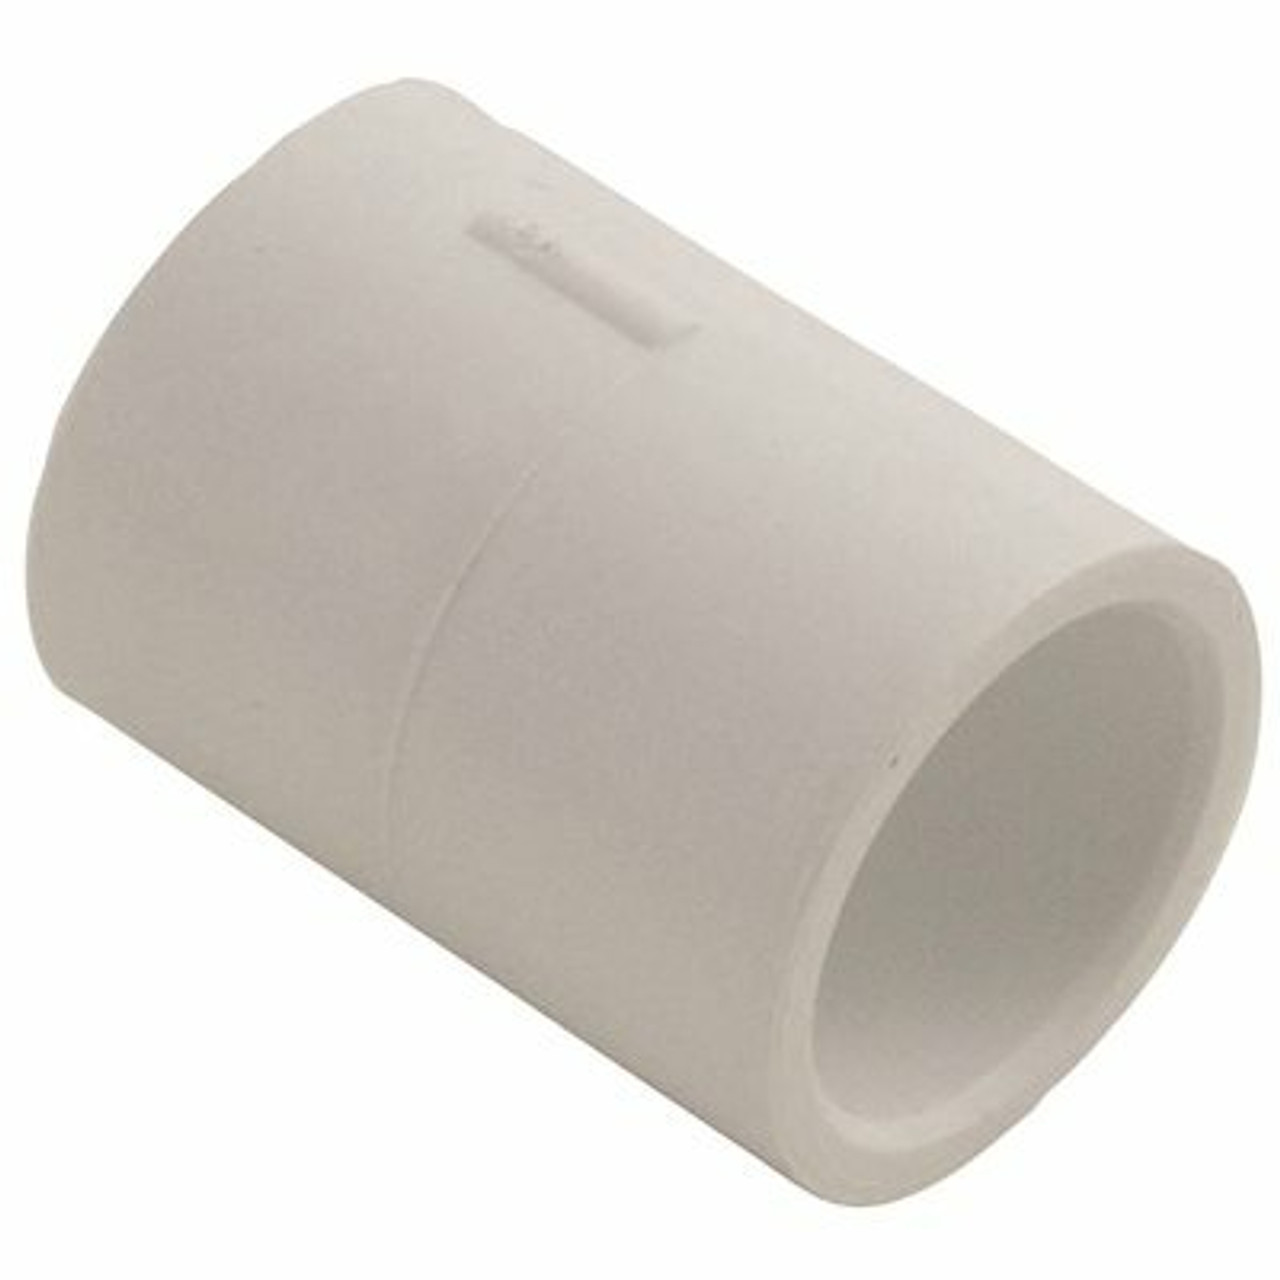 Proplus Pvc Female Adapter, 2 In.